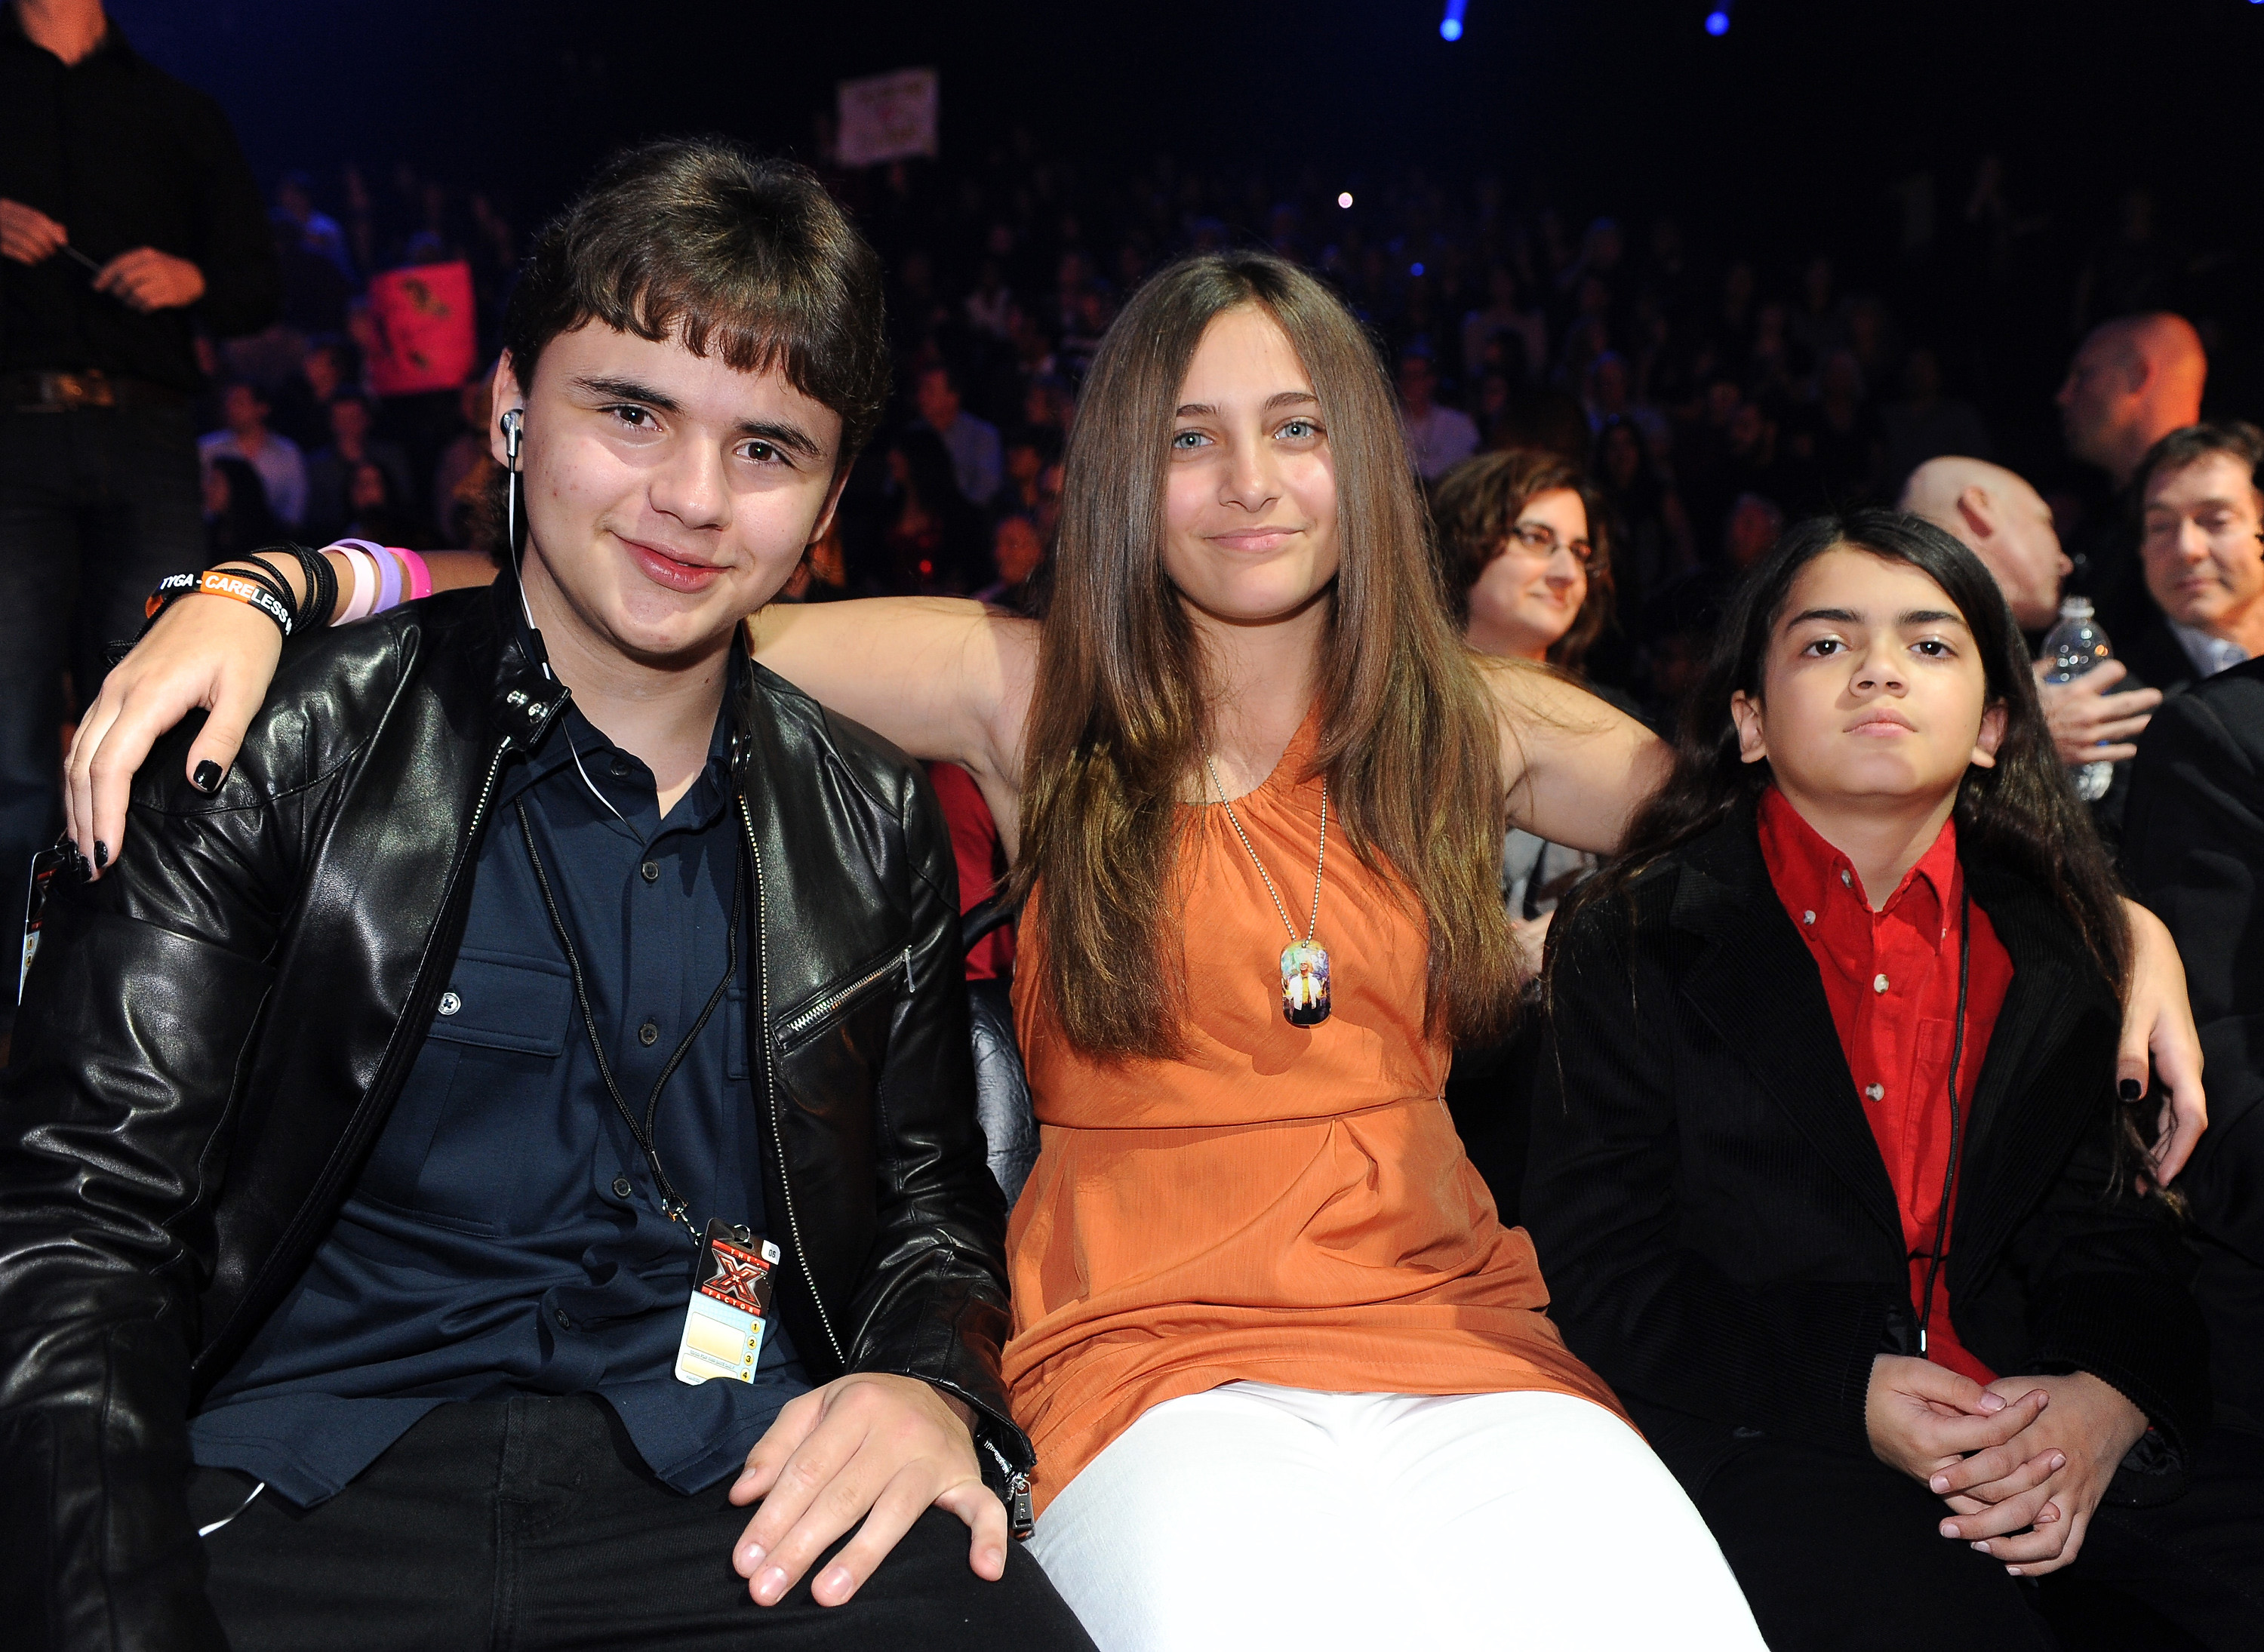 Michael Jackson's children Prince Jackson, Paris Jackson and Blanket Jackson on November 30, 2011 in West Hollywood, California. | Source: Getty Images